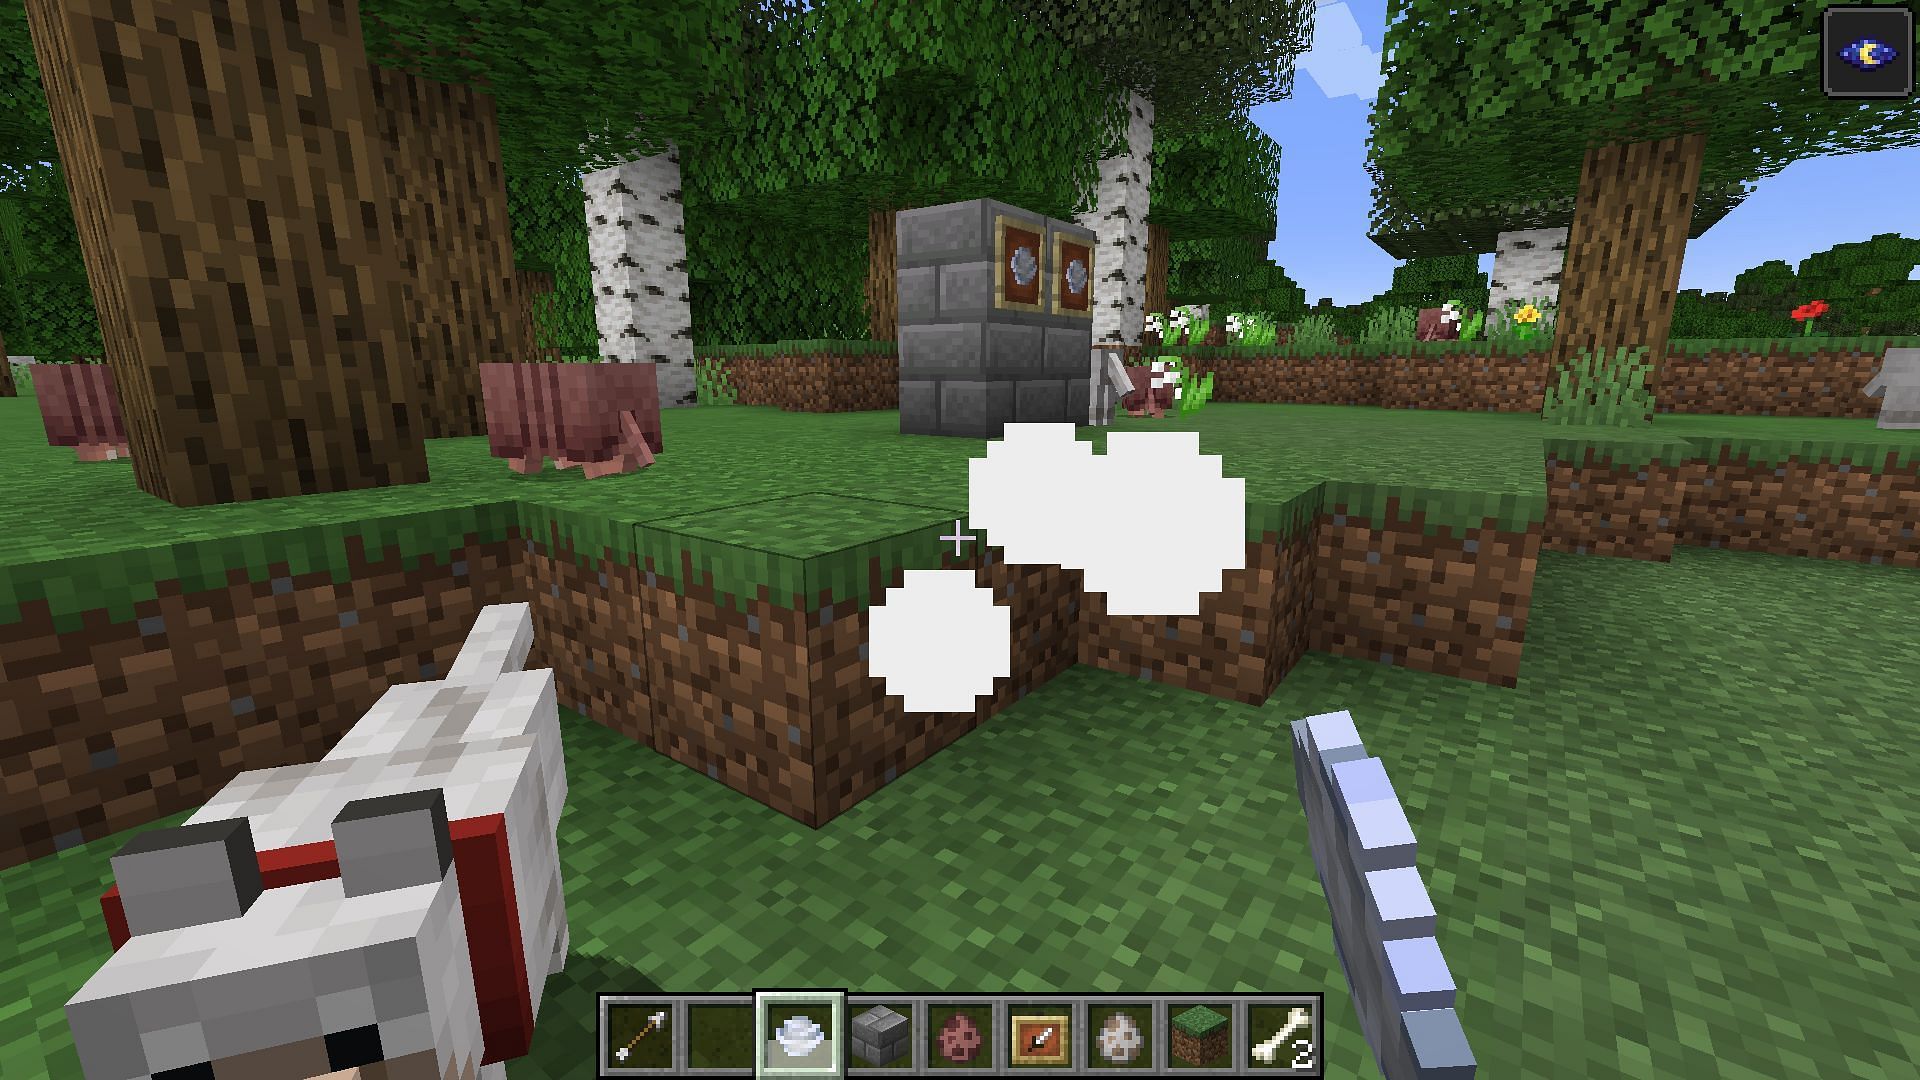 Wind charge added in snapshot 24w06a (Mojang Studios)